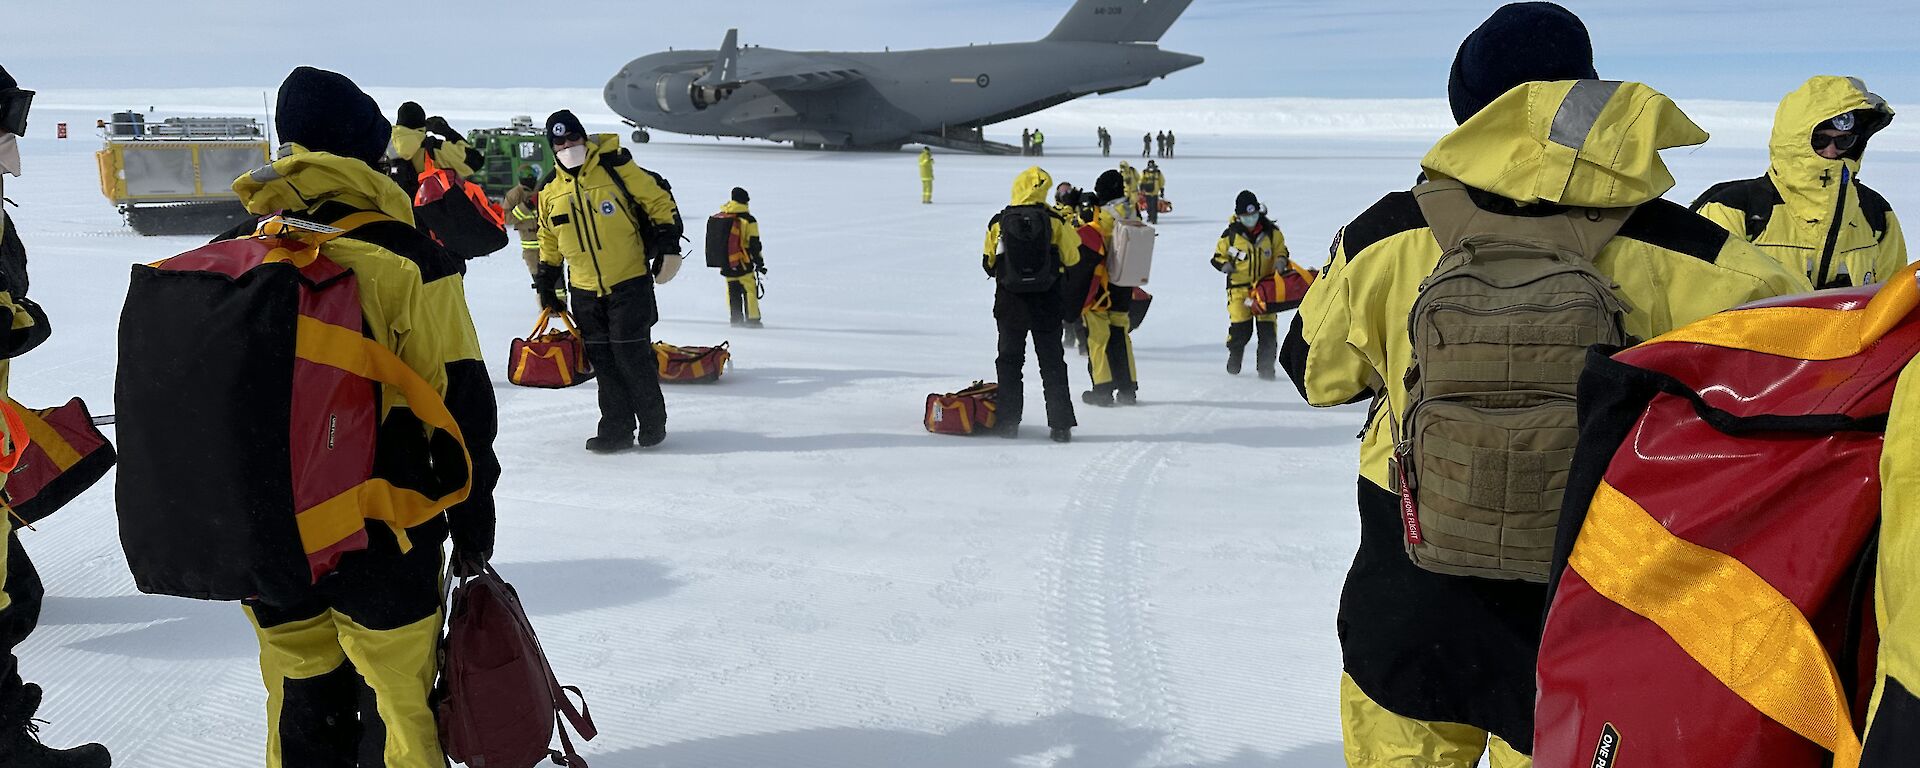 A crowd of people in Antarctic survival gear look on towards a C-17A in the background.